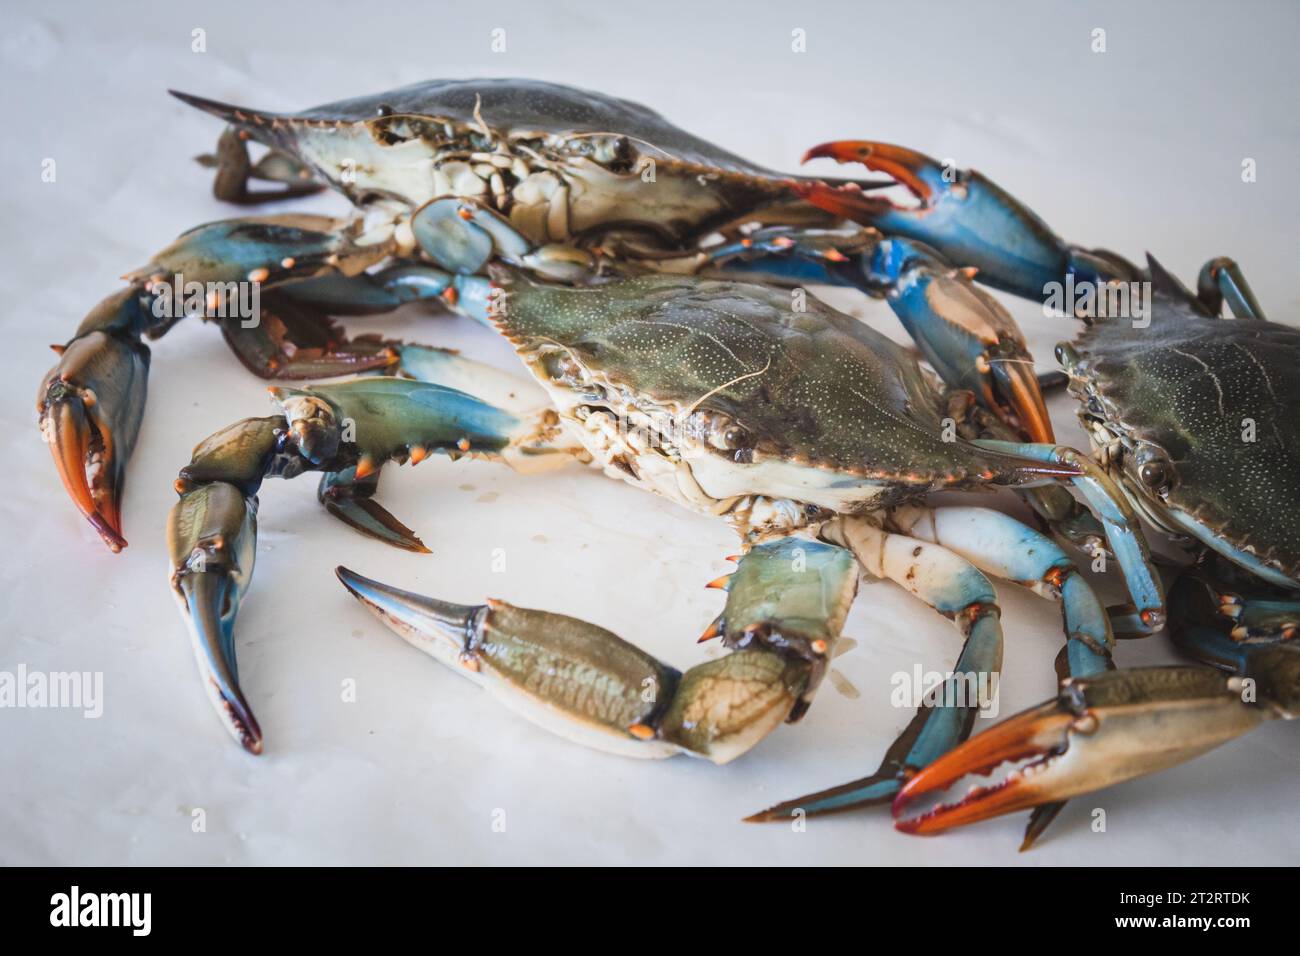 Callinectes sapidus, blue crab, invasive species of crab native to the waters of the western Atlantic Ocean and the Gulf of Mexico in a fish market Stock Photo